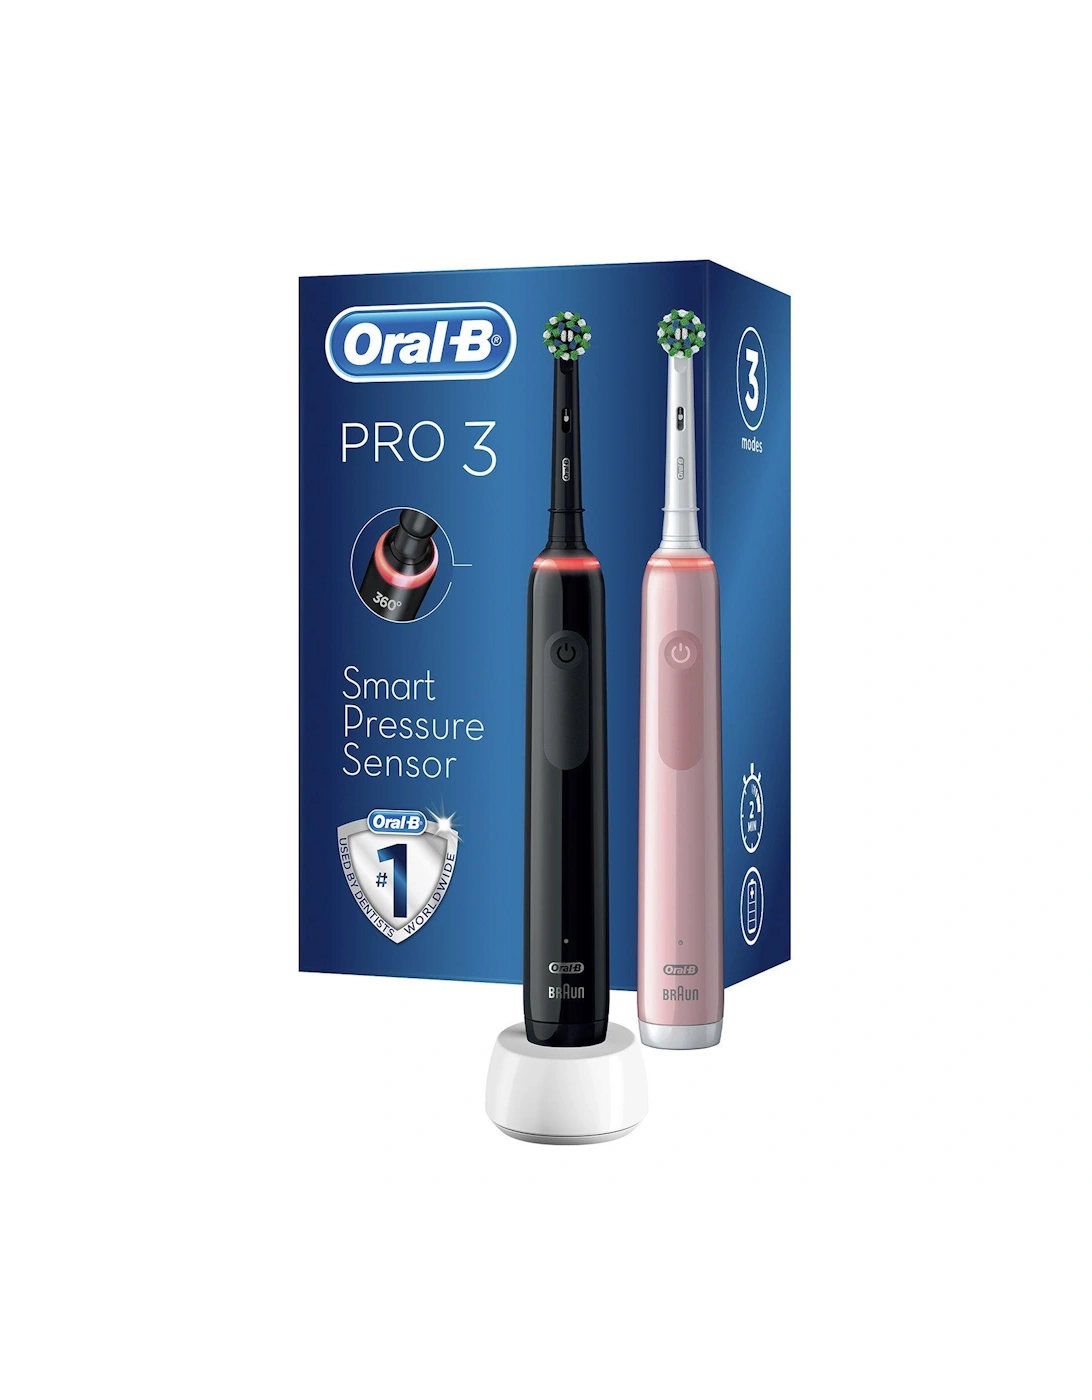 Oral-B Pro 3 - 3900 Cross Action - Black & Pink Electric Toothbrushes Designed By Braun, 2 of 1